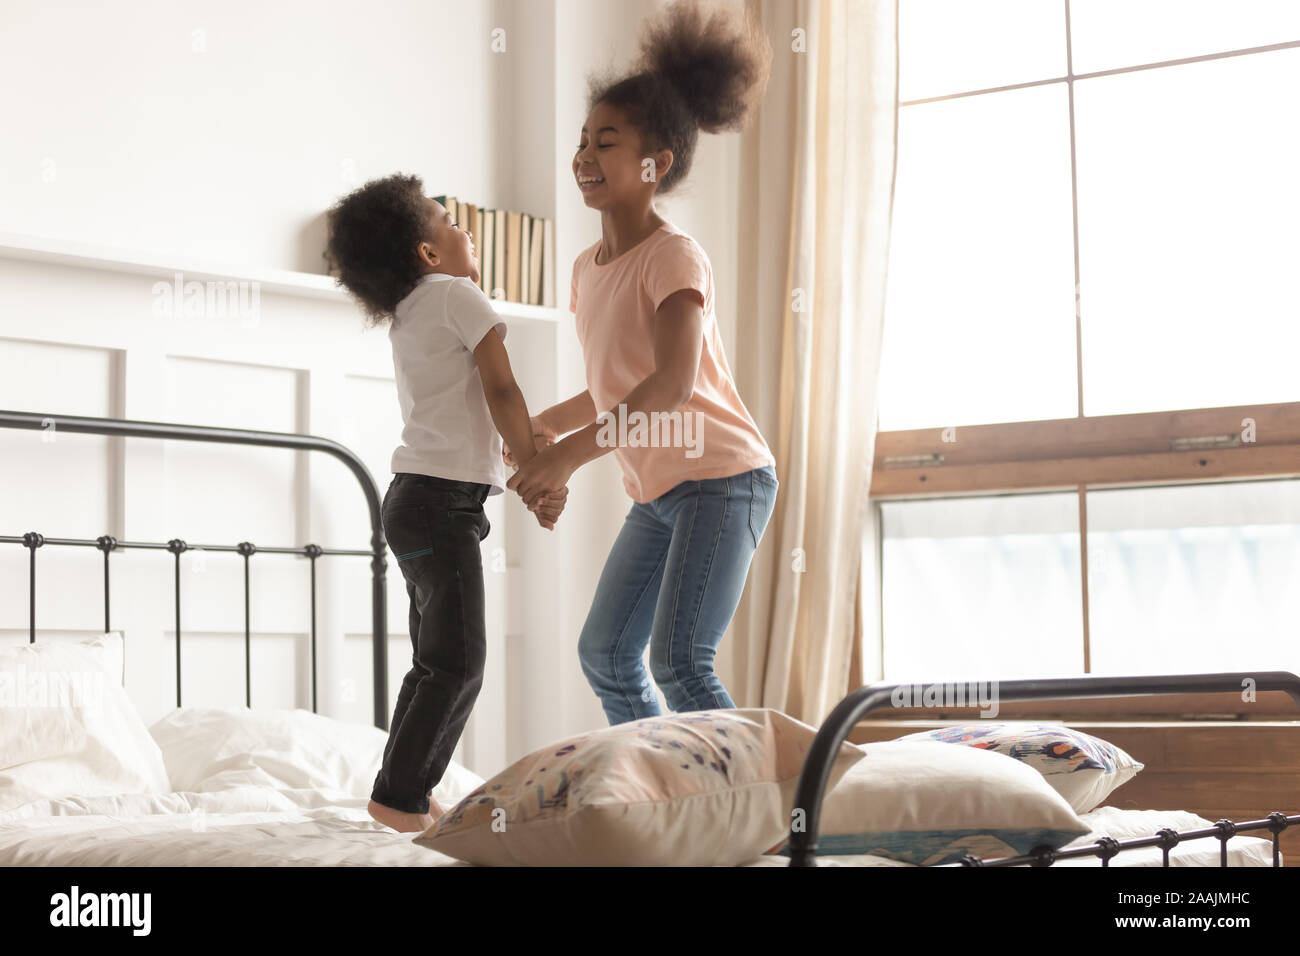 Mixed-race brother and sister holding hands jumping on bed Stock Photo